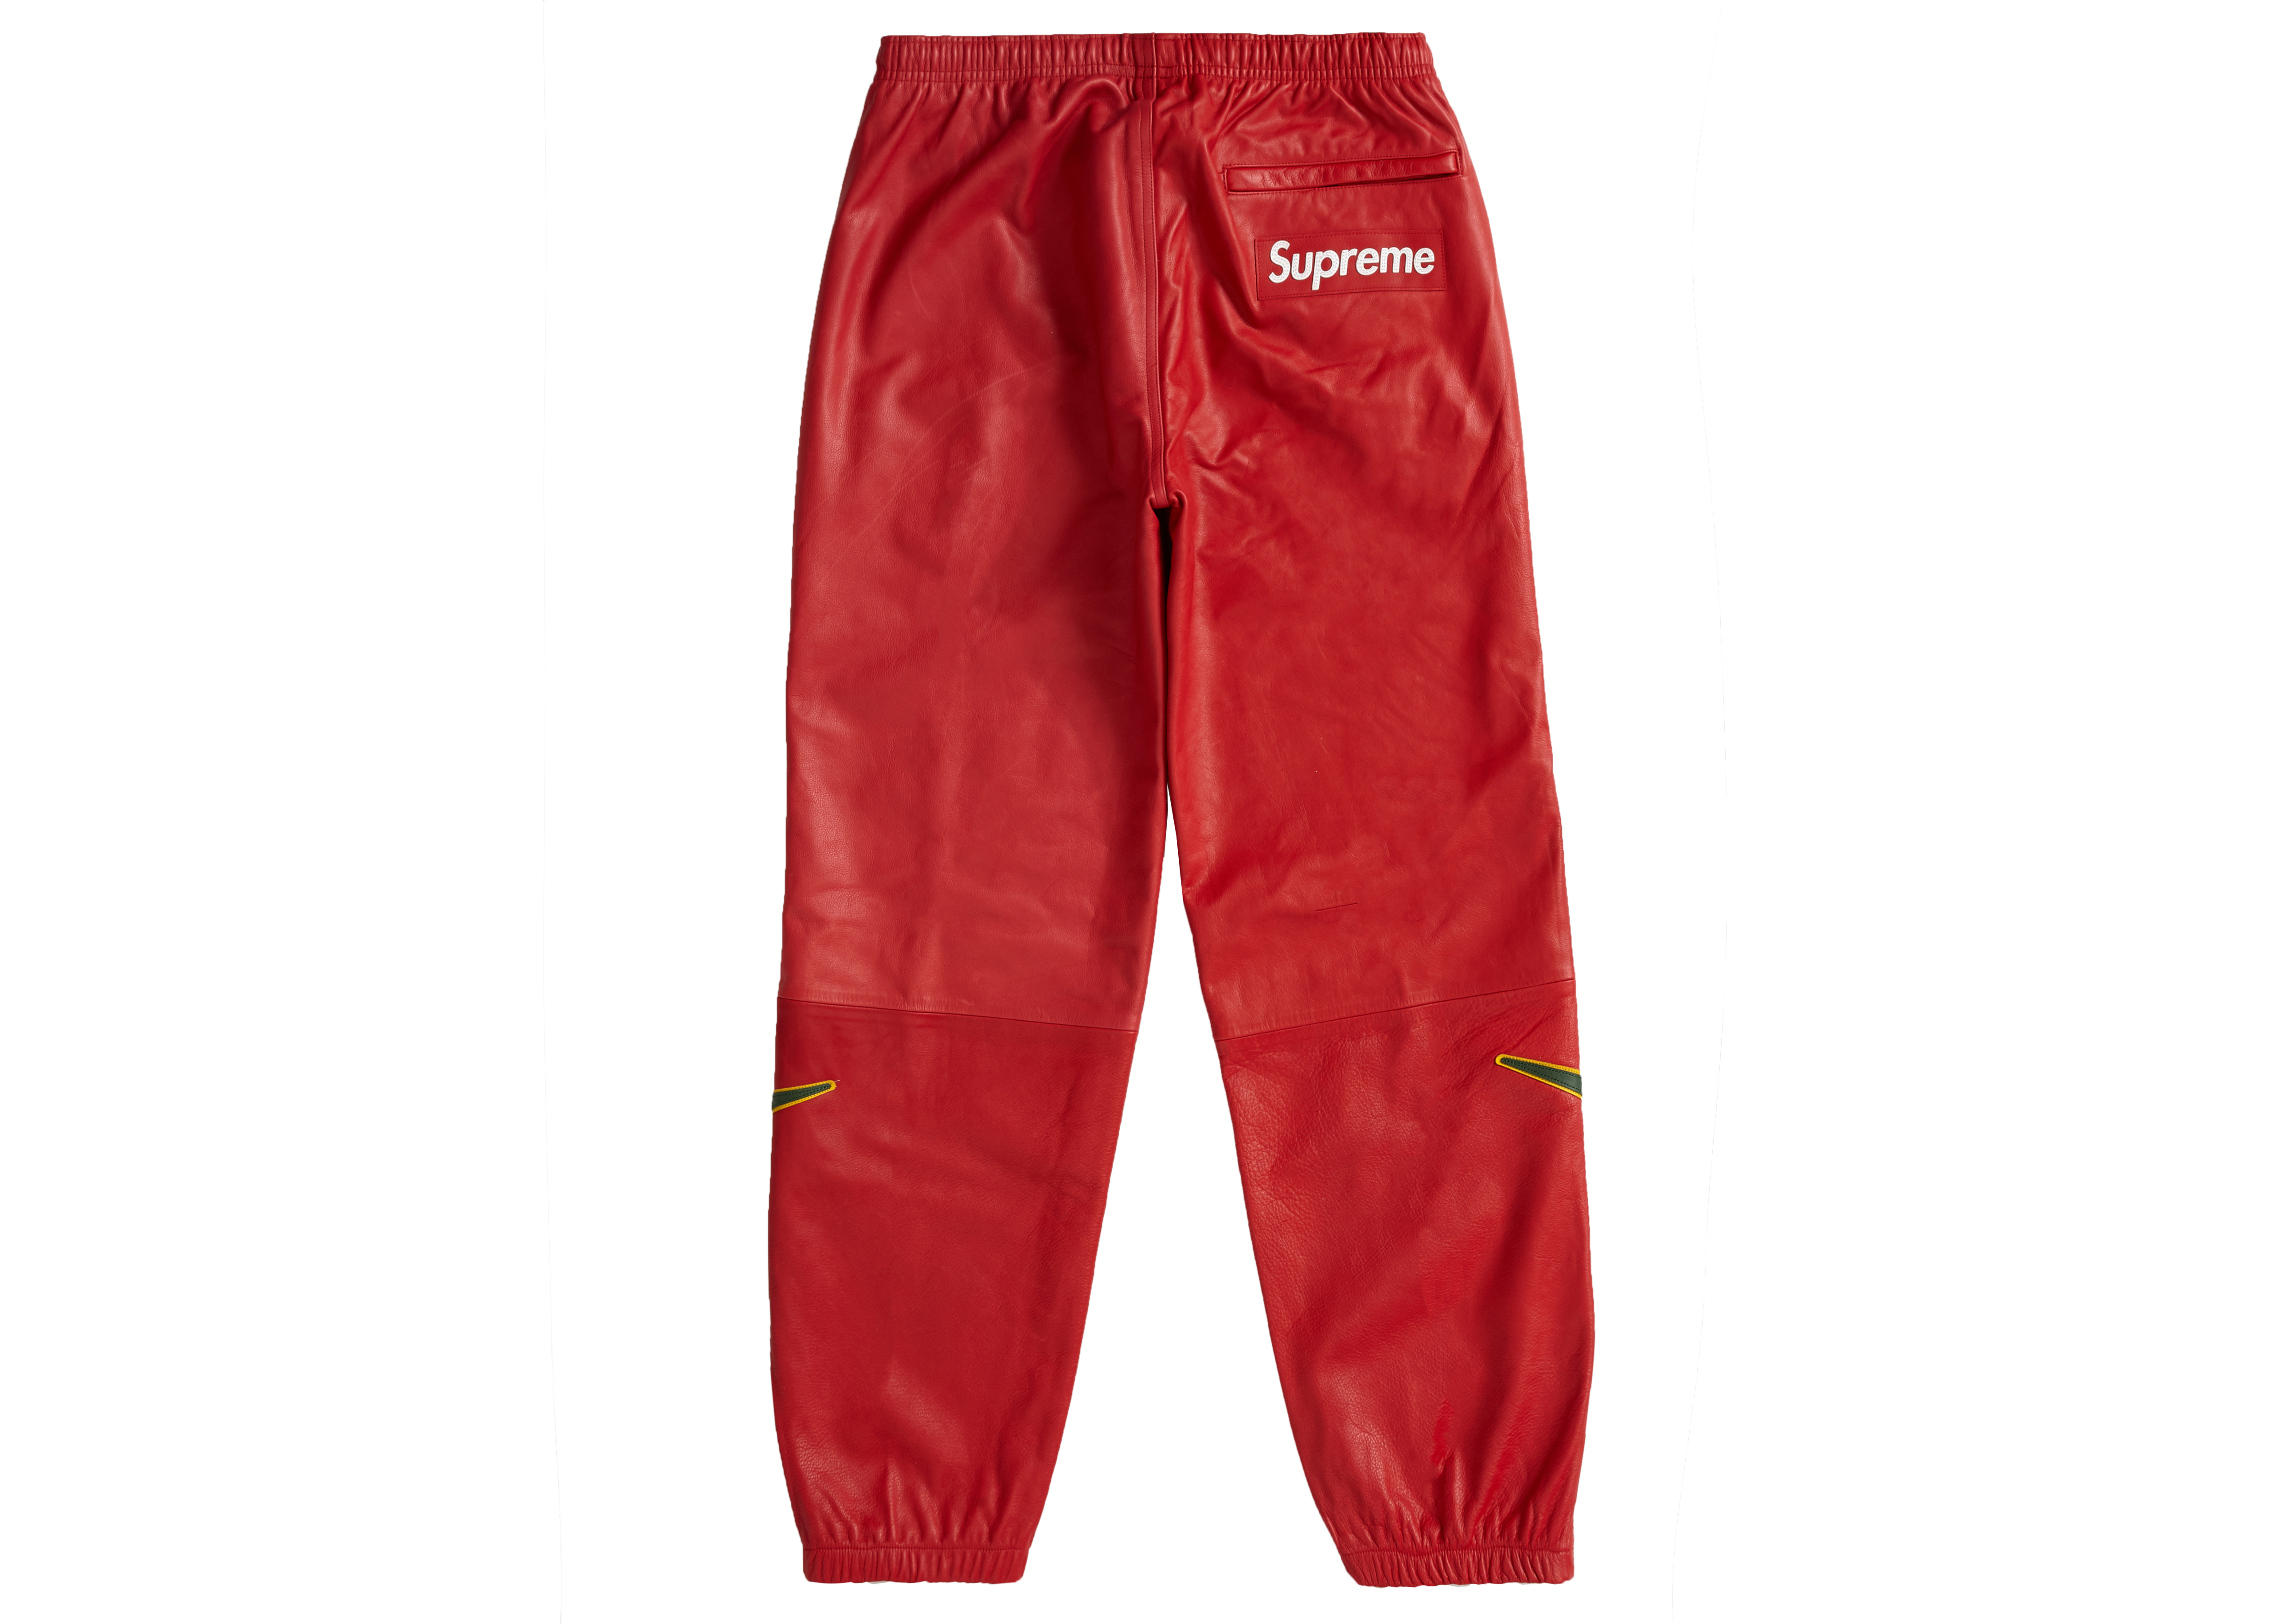 Supreme Nike Leather Warm Up Pant Red Men's - FW19 - US